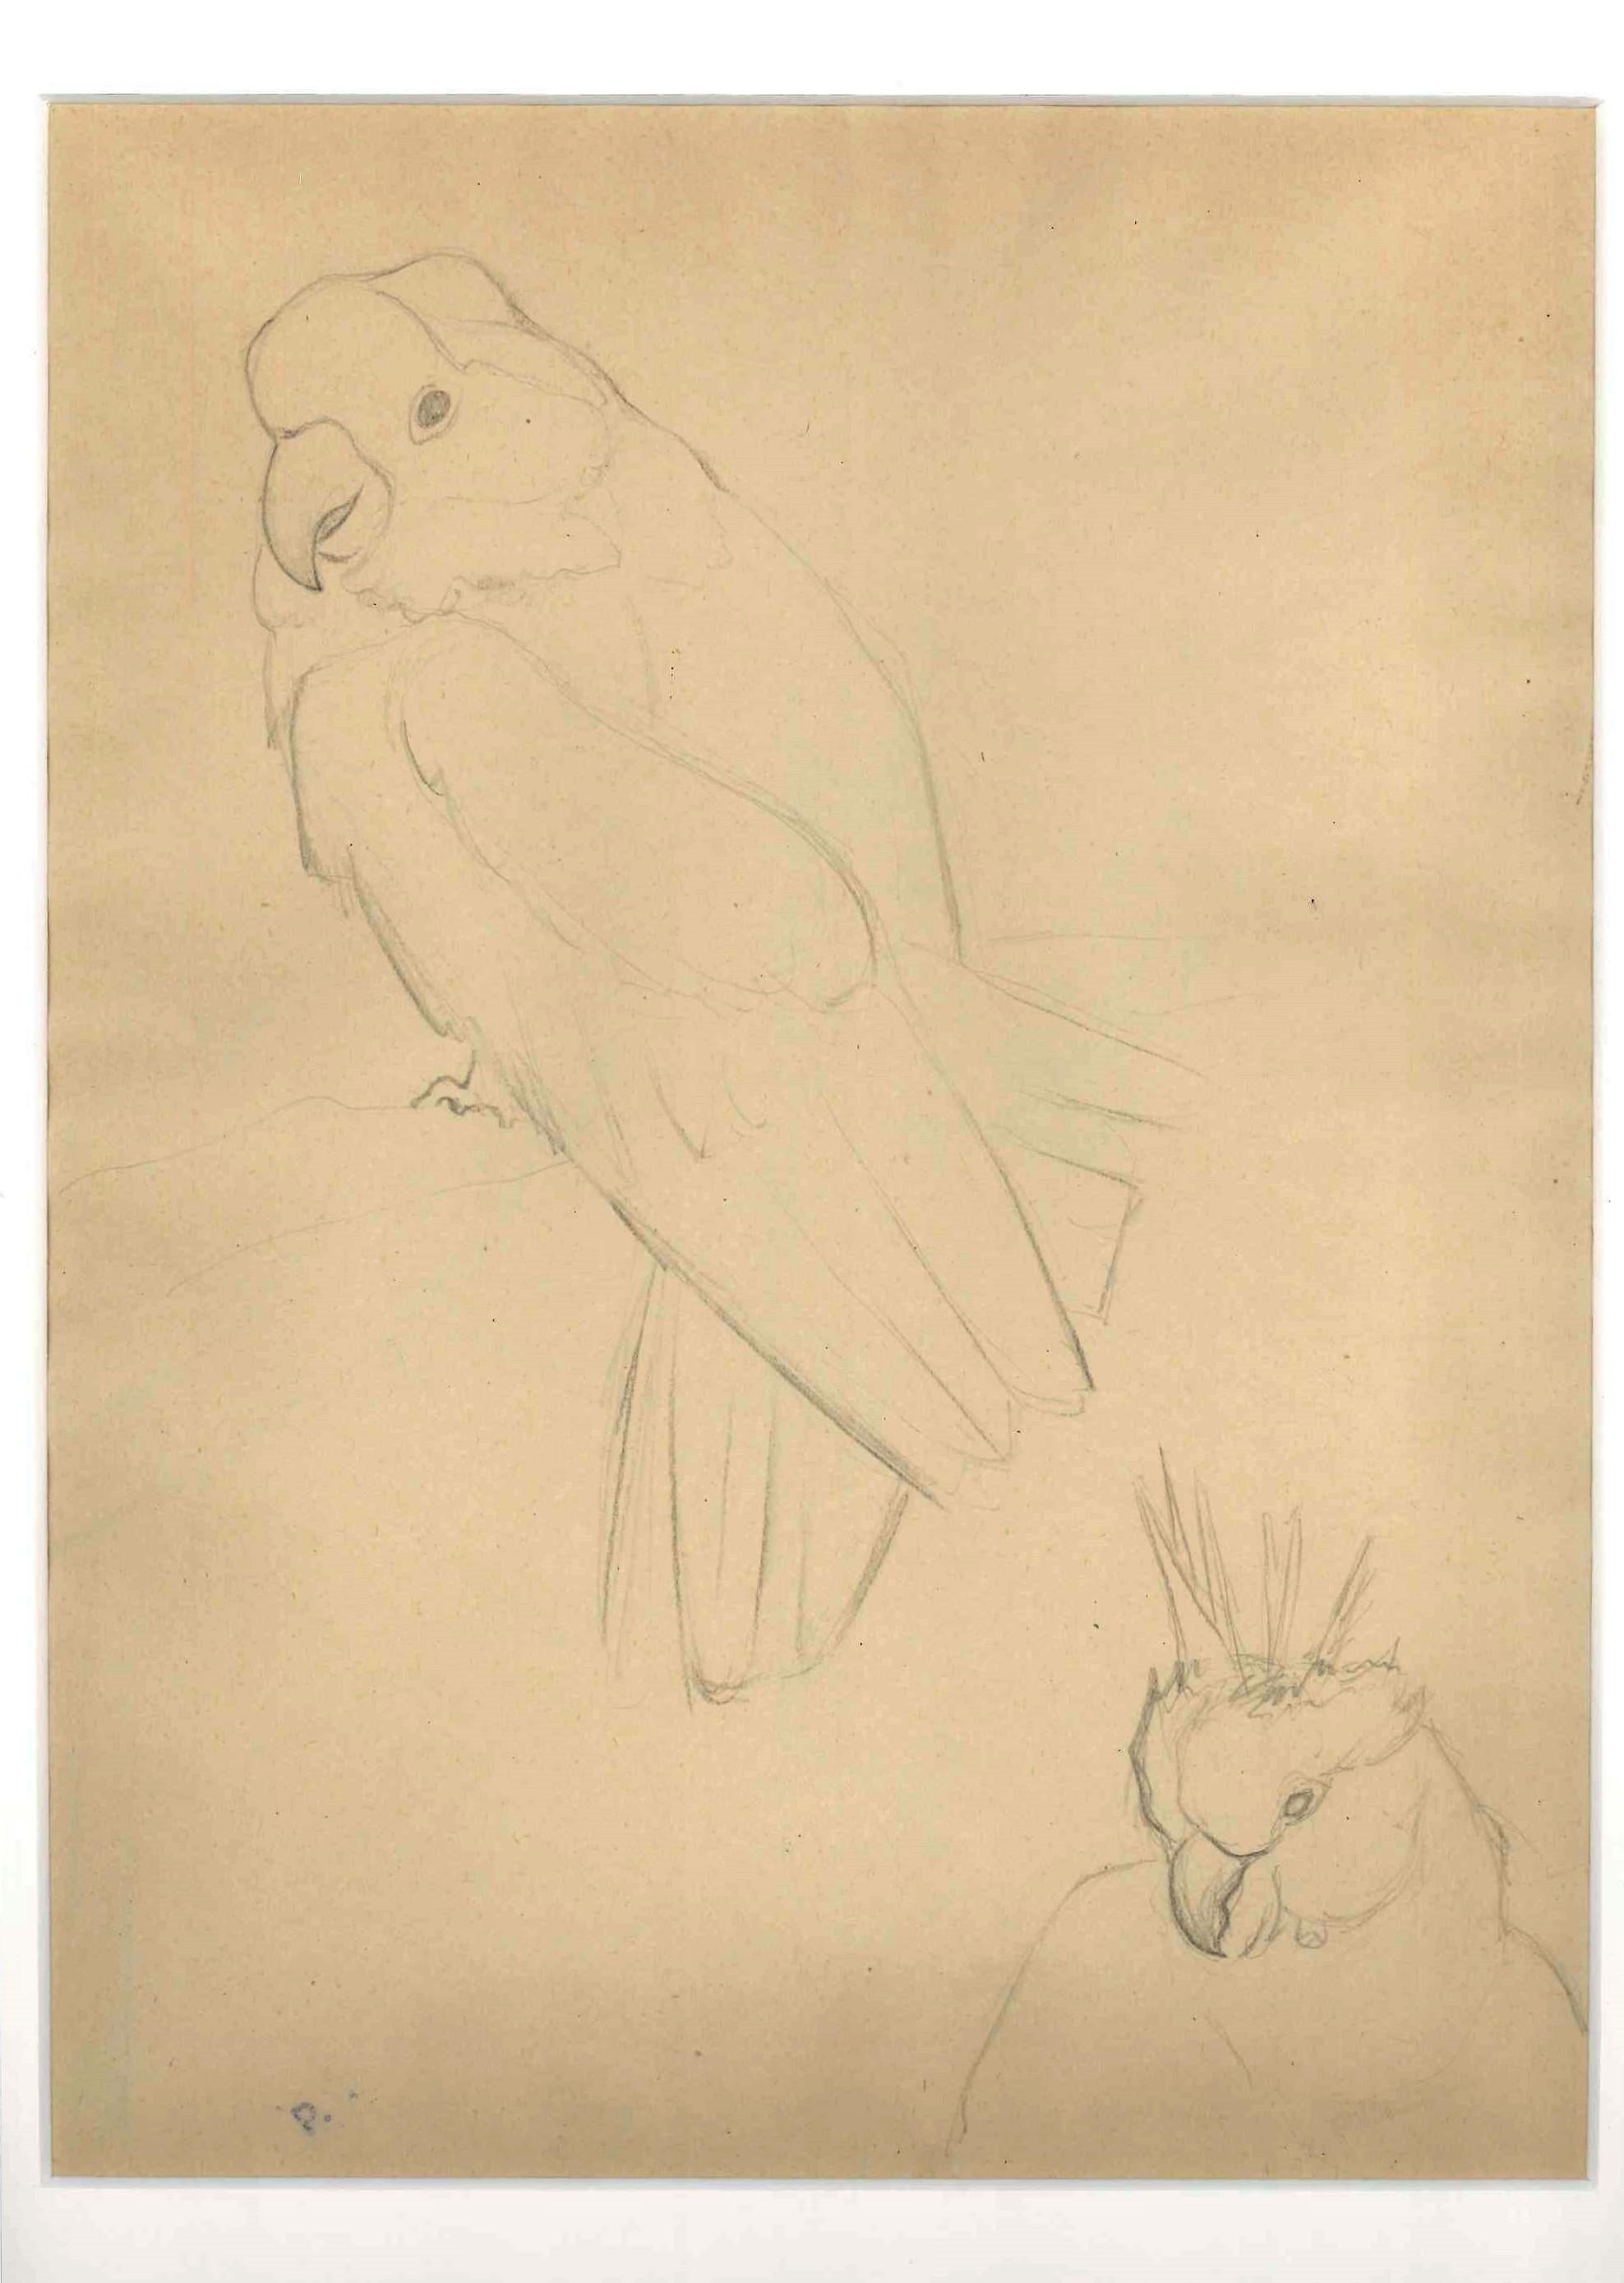 Parrots is an original drawing realized by Ernest Rouart in the first years of the XX Century. Pencil on paper. The back of the artwork is sketched in pencil. Passepartout included (48 x 34 cm). Perfect conditions. 

Nice composition representing